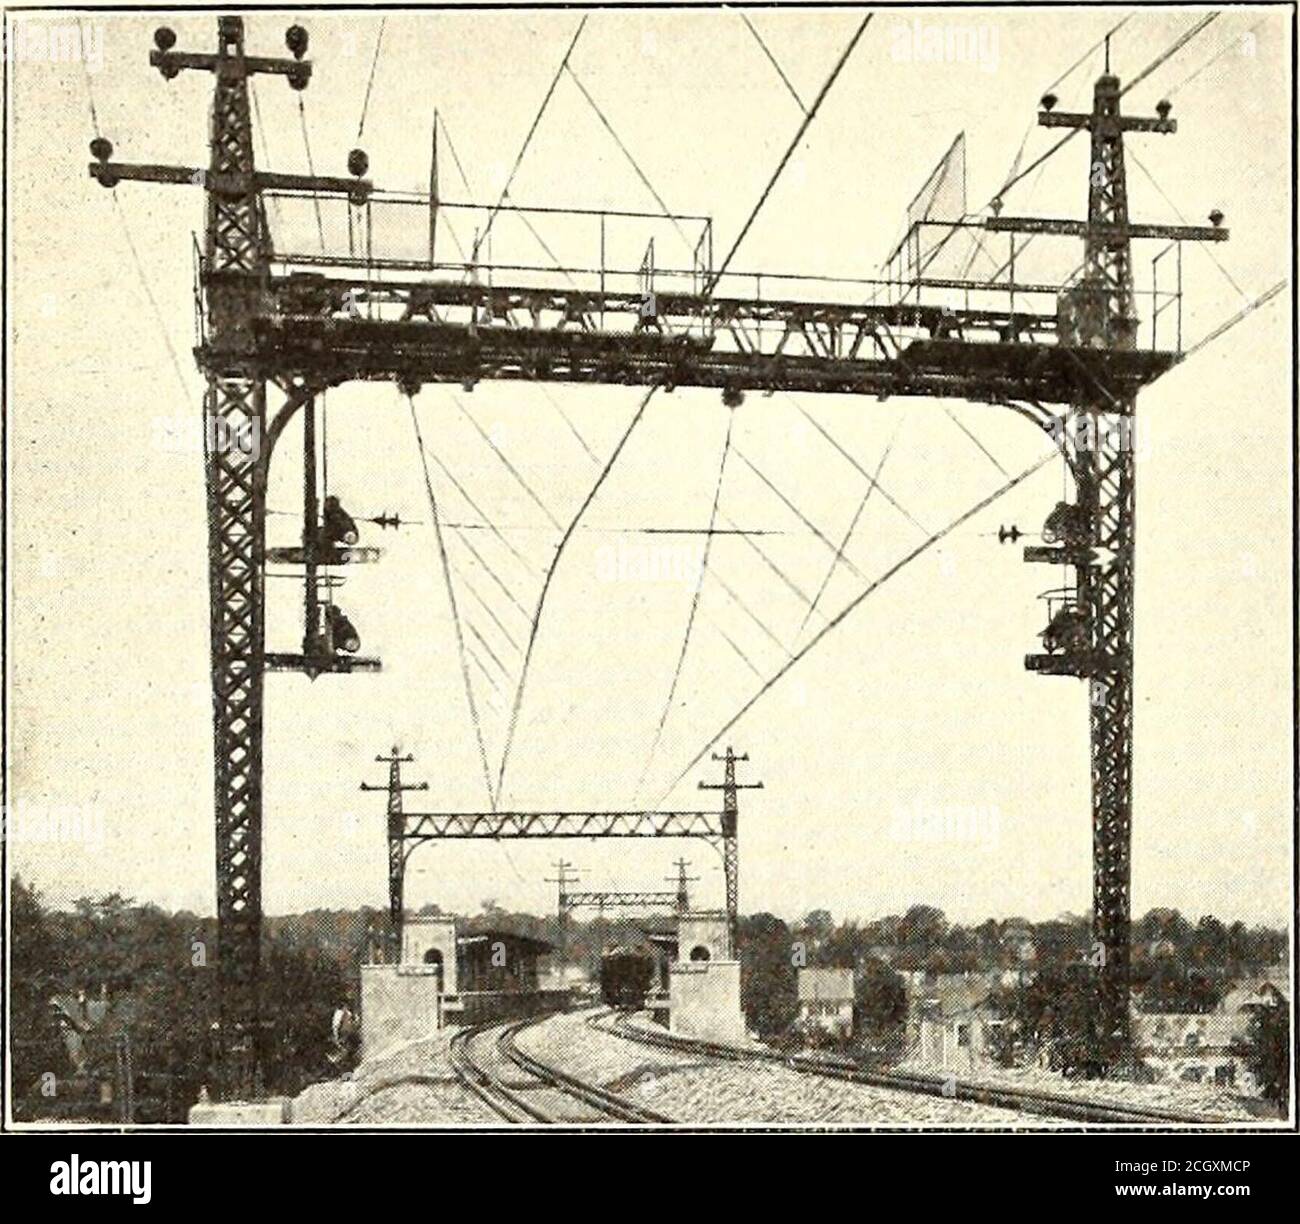 . Electric railway journal . WESTCHESTER SIGNALS—TYPICAL SEMAPHORE SIGNALS ONCATENARY BRIDGE FOR DOUBLE TRACK ers, each consisting of a 37-kw single-phase generator,mounted on the same shaft and driven by a three-phaseinduction motor. Organization Altogether there are 110 semaphore signals on theline and these, together with the four interlocking plantsthat are in continuous operation, are kept up by a forceof ten maintainers. The signal organization is headedby F. Zogbaum, engineer of maintenance New York,Westchester & Boston Railway, who has general super-vision of the track overhead lines, Stock Photo